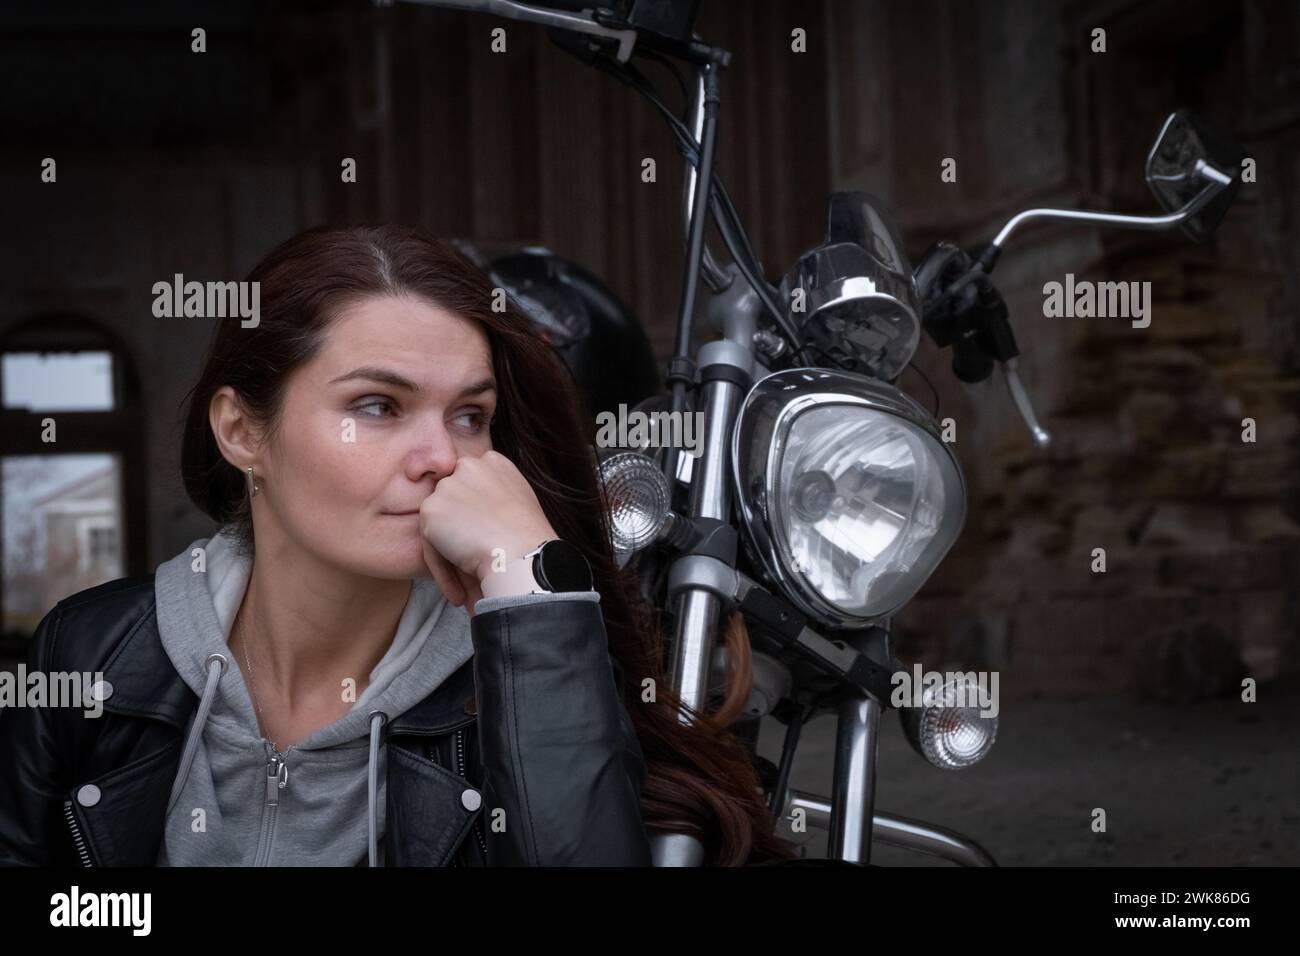 Portrait of a biker girl with a pensive look Stock Photo